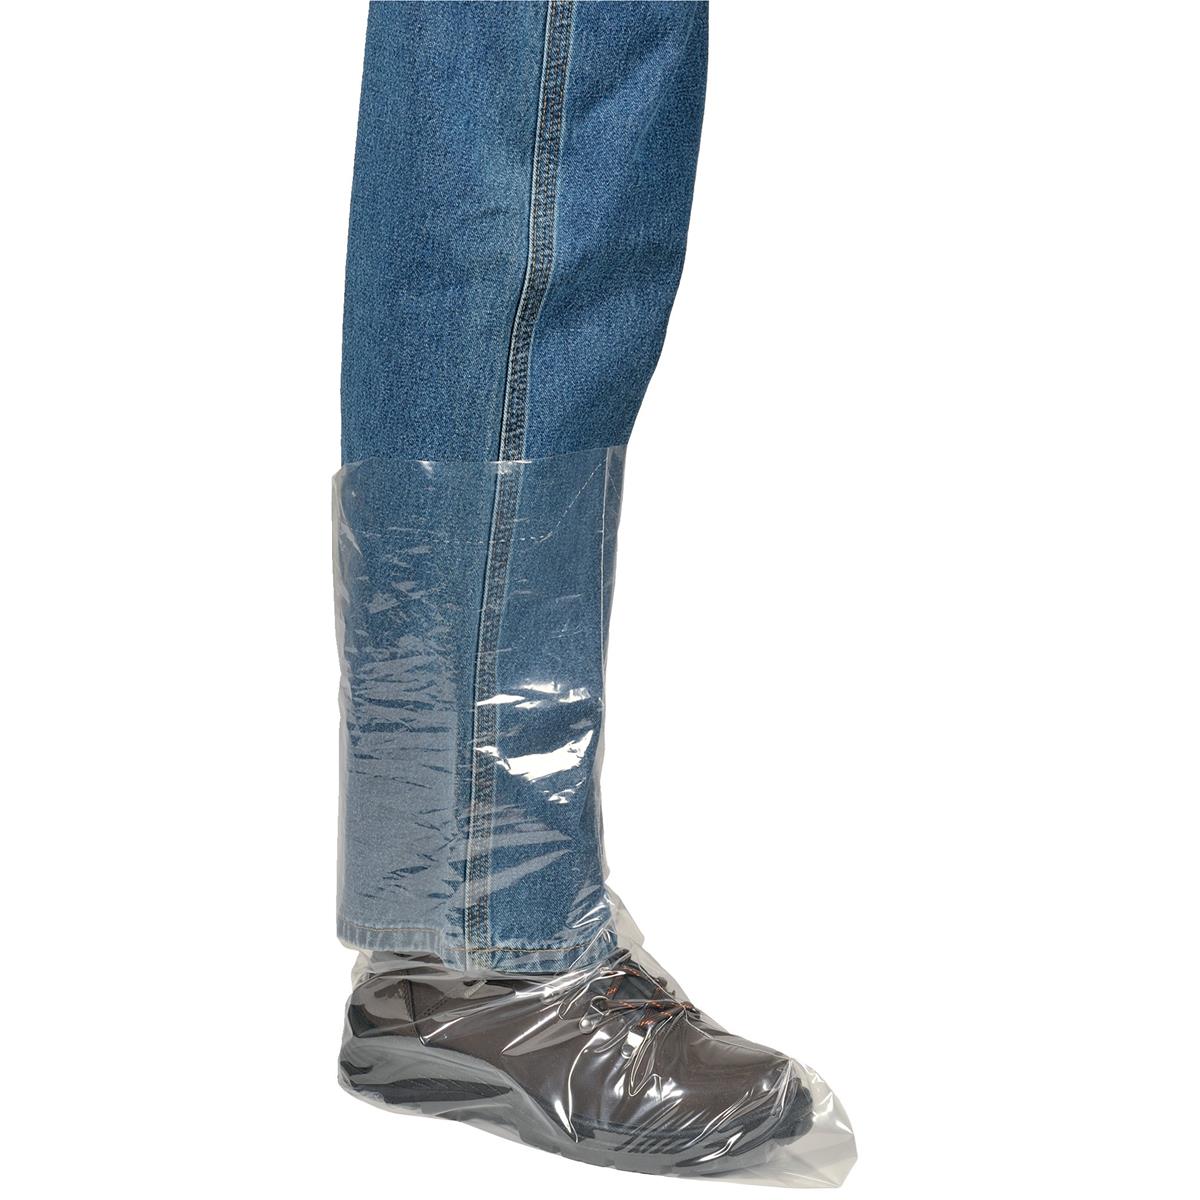 clear boot covers